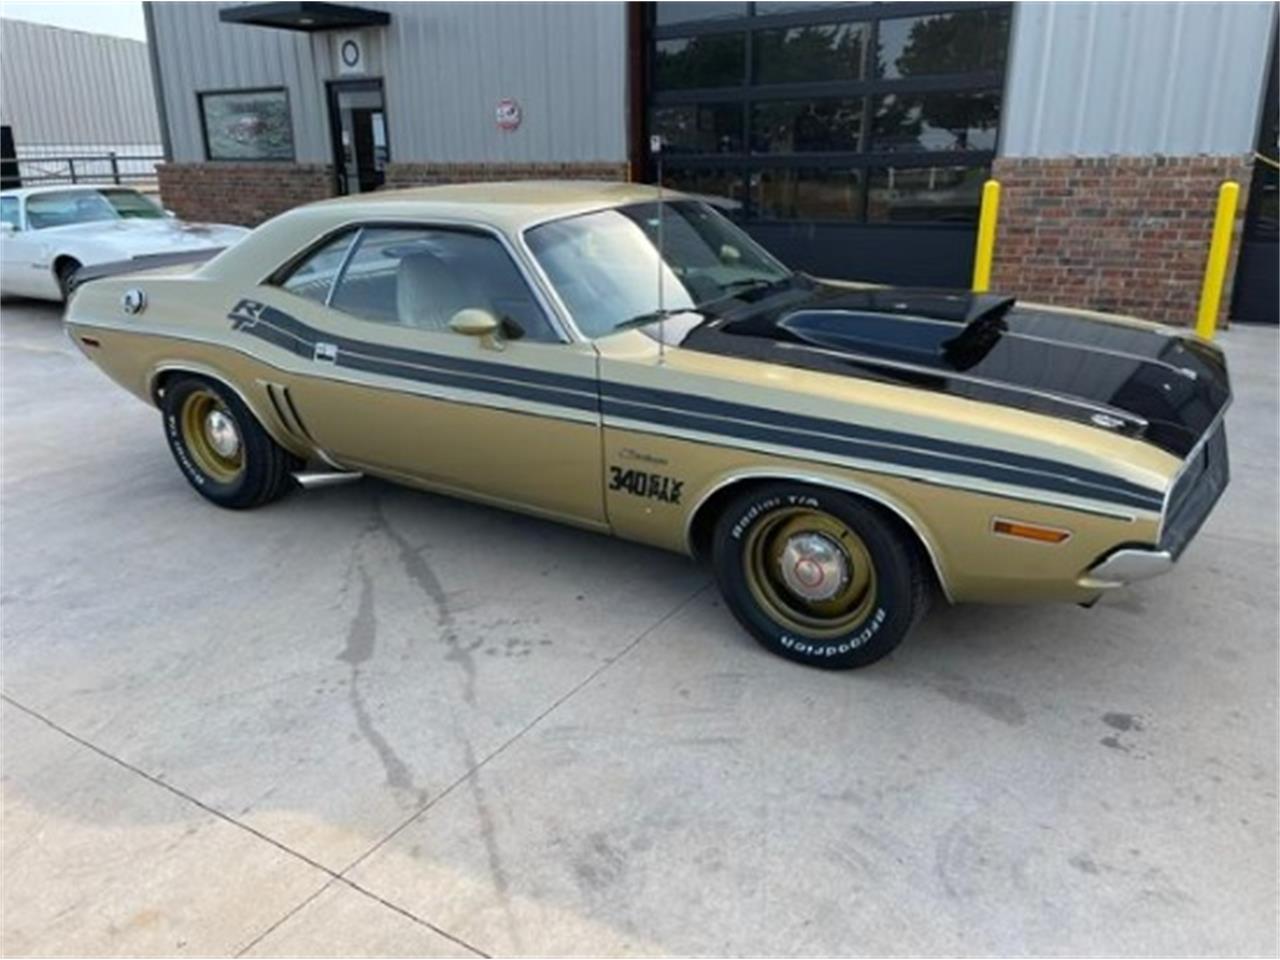 For Sale at Auction: 1970 Dodge Challenger in Shawnee, Oklahoma for sale in Shawnee, OK